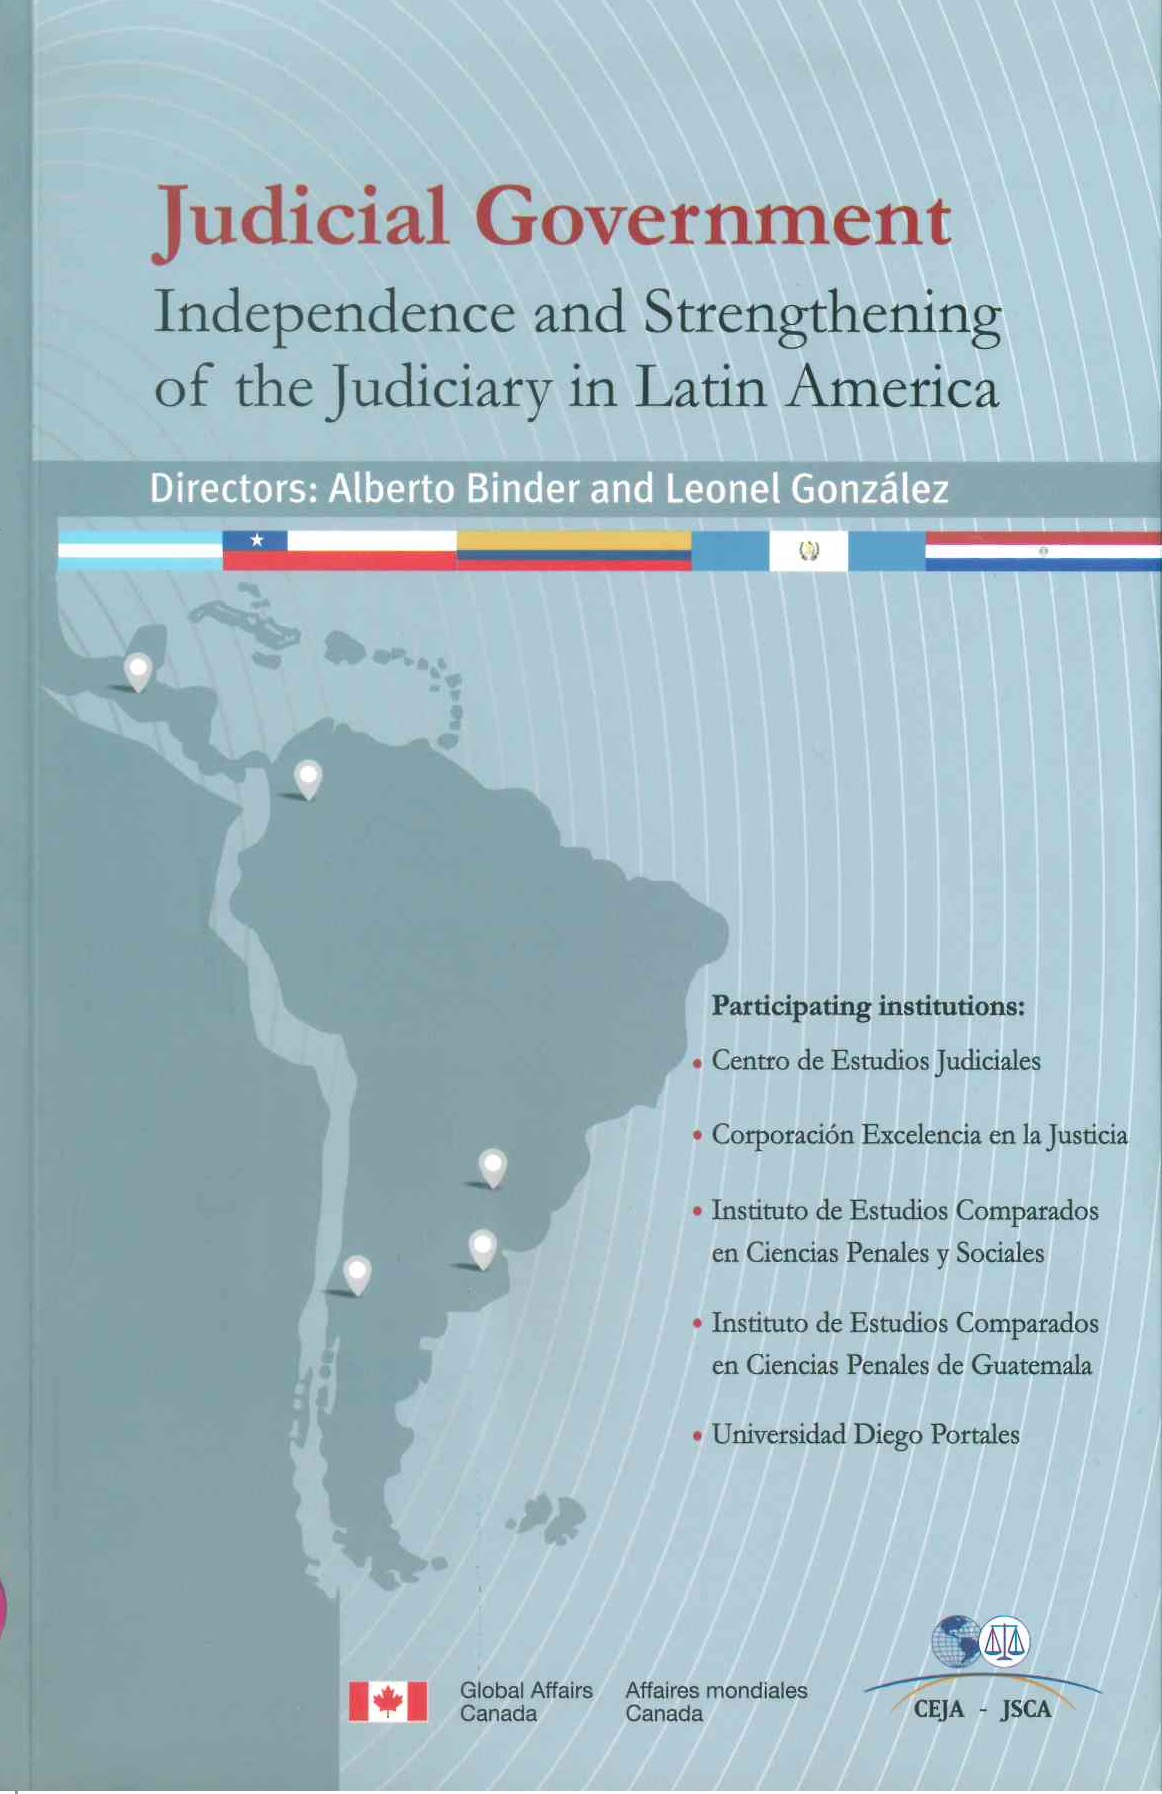 Judicial Government: Independence and strengthening of the judiciary in Latin America